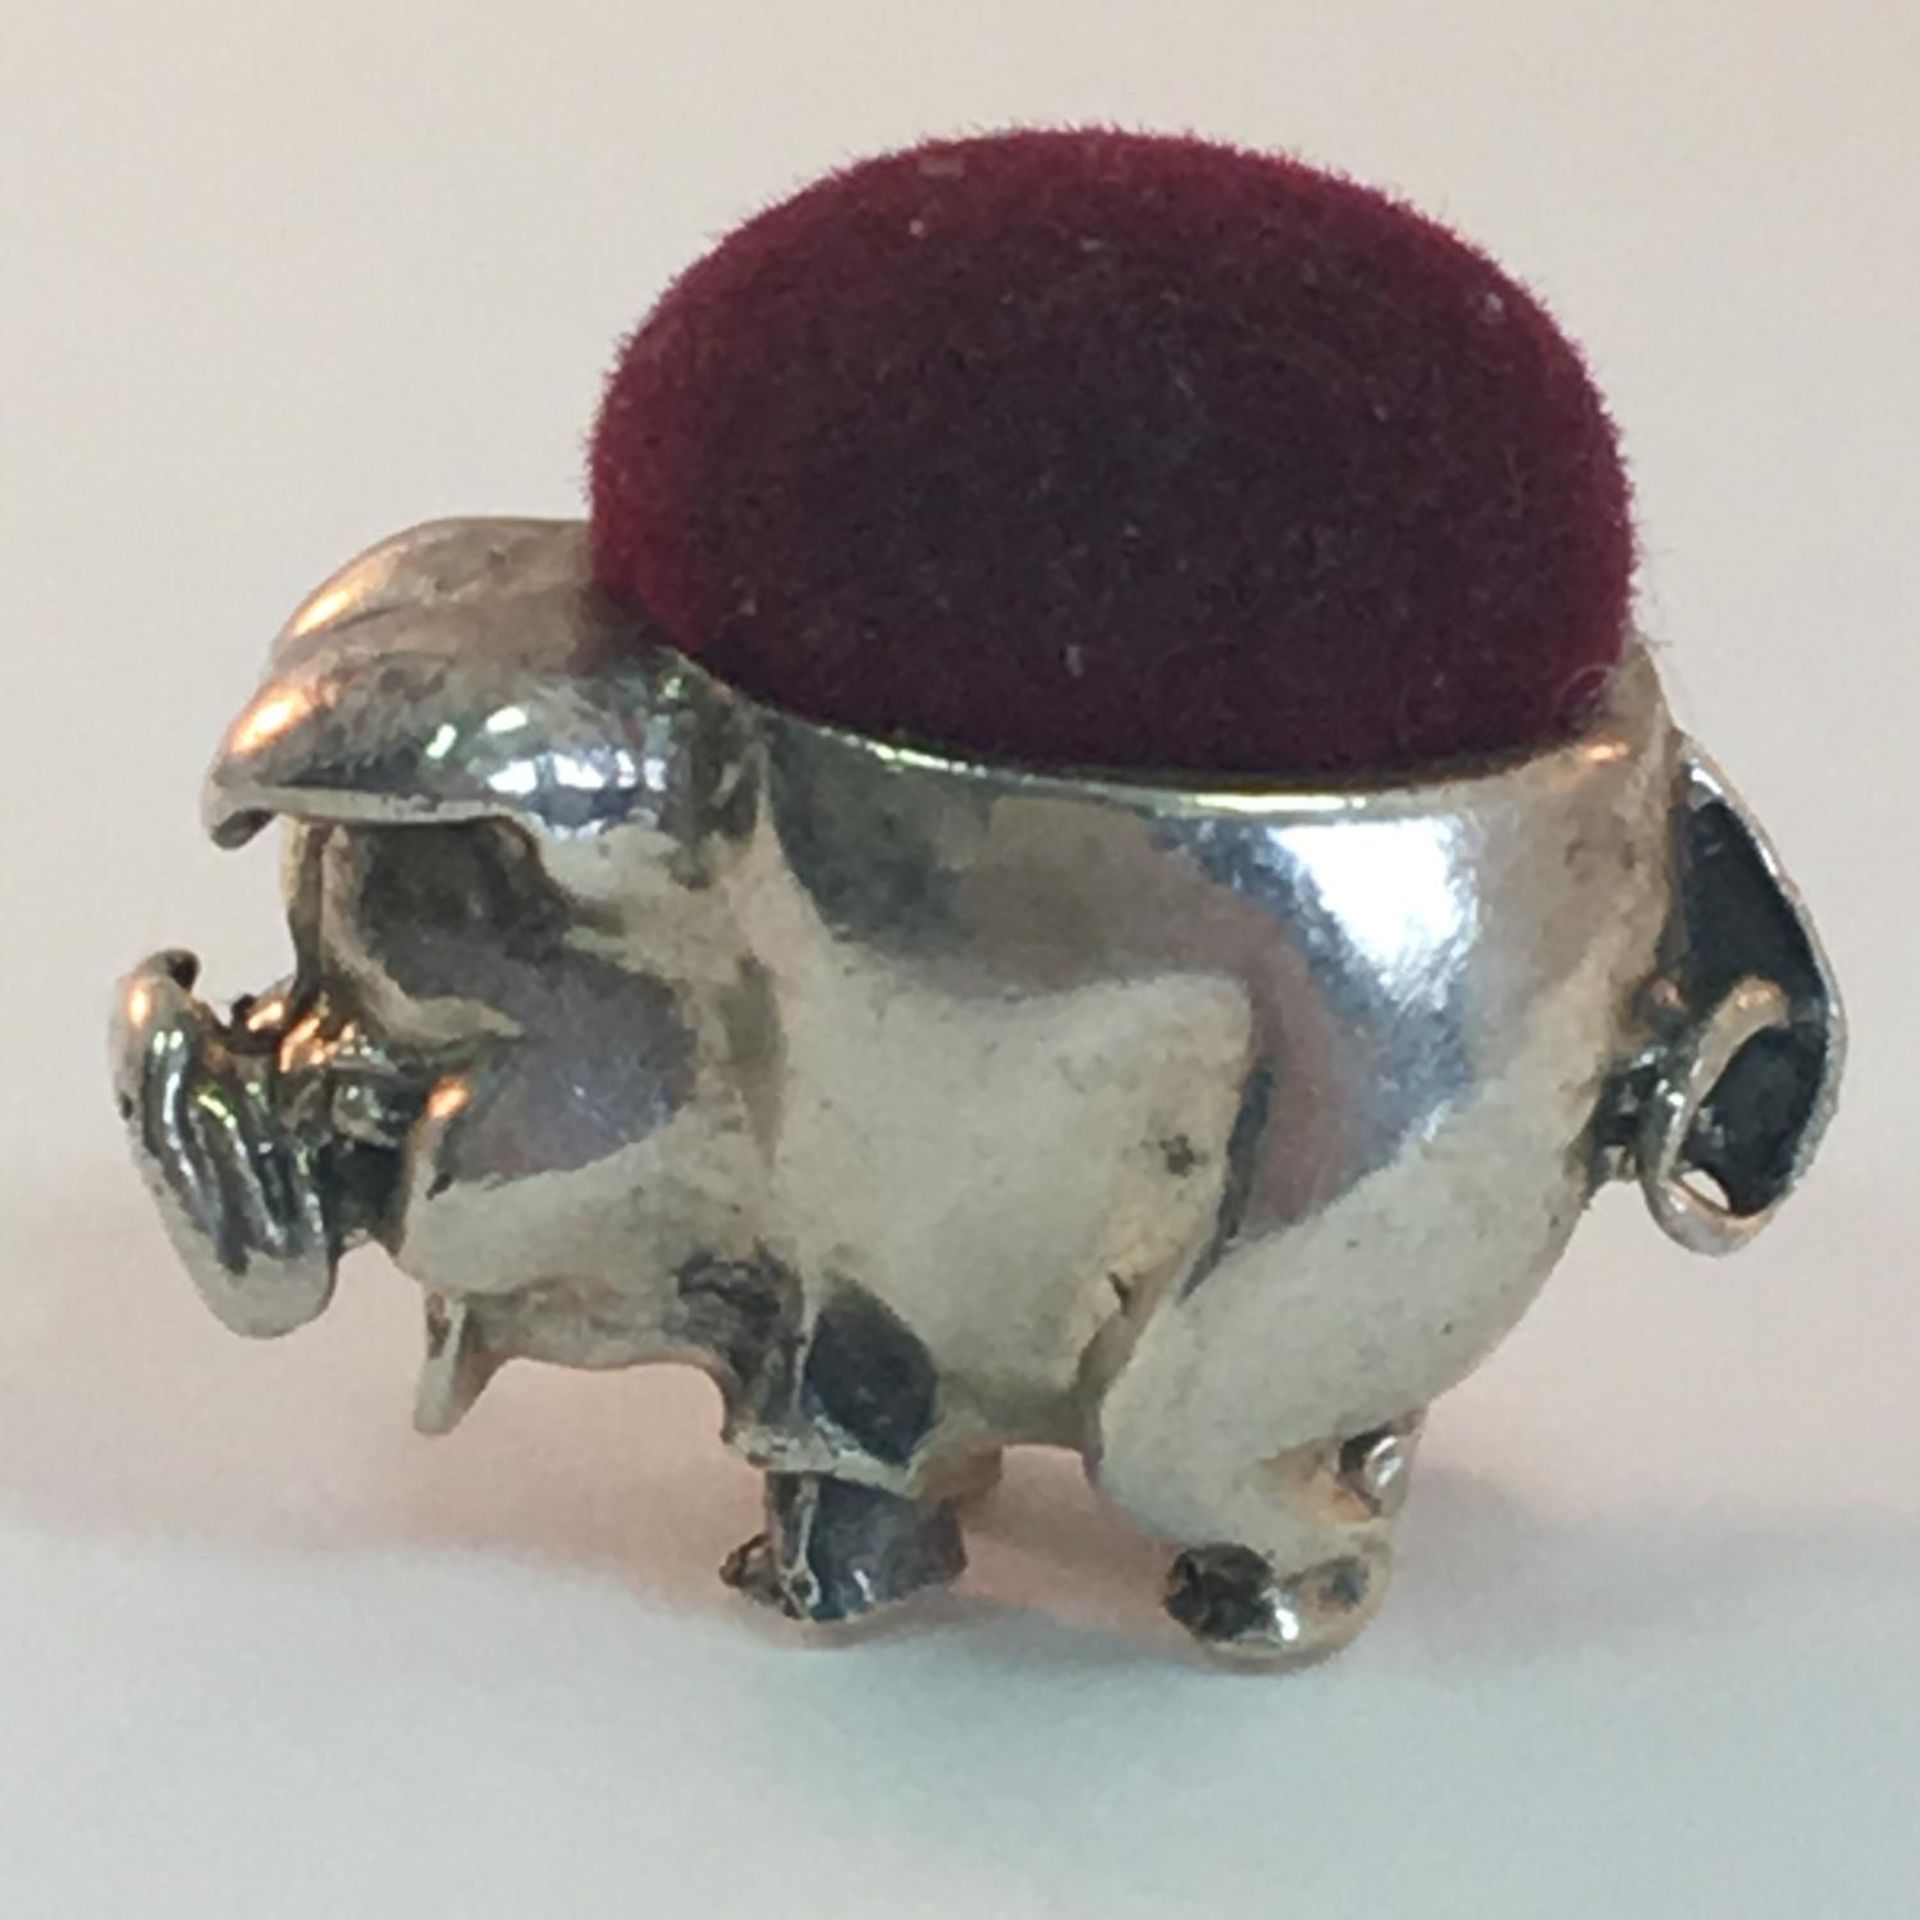 Miniature silver pin cushion in the form of a pig or boar, stamped 925